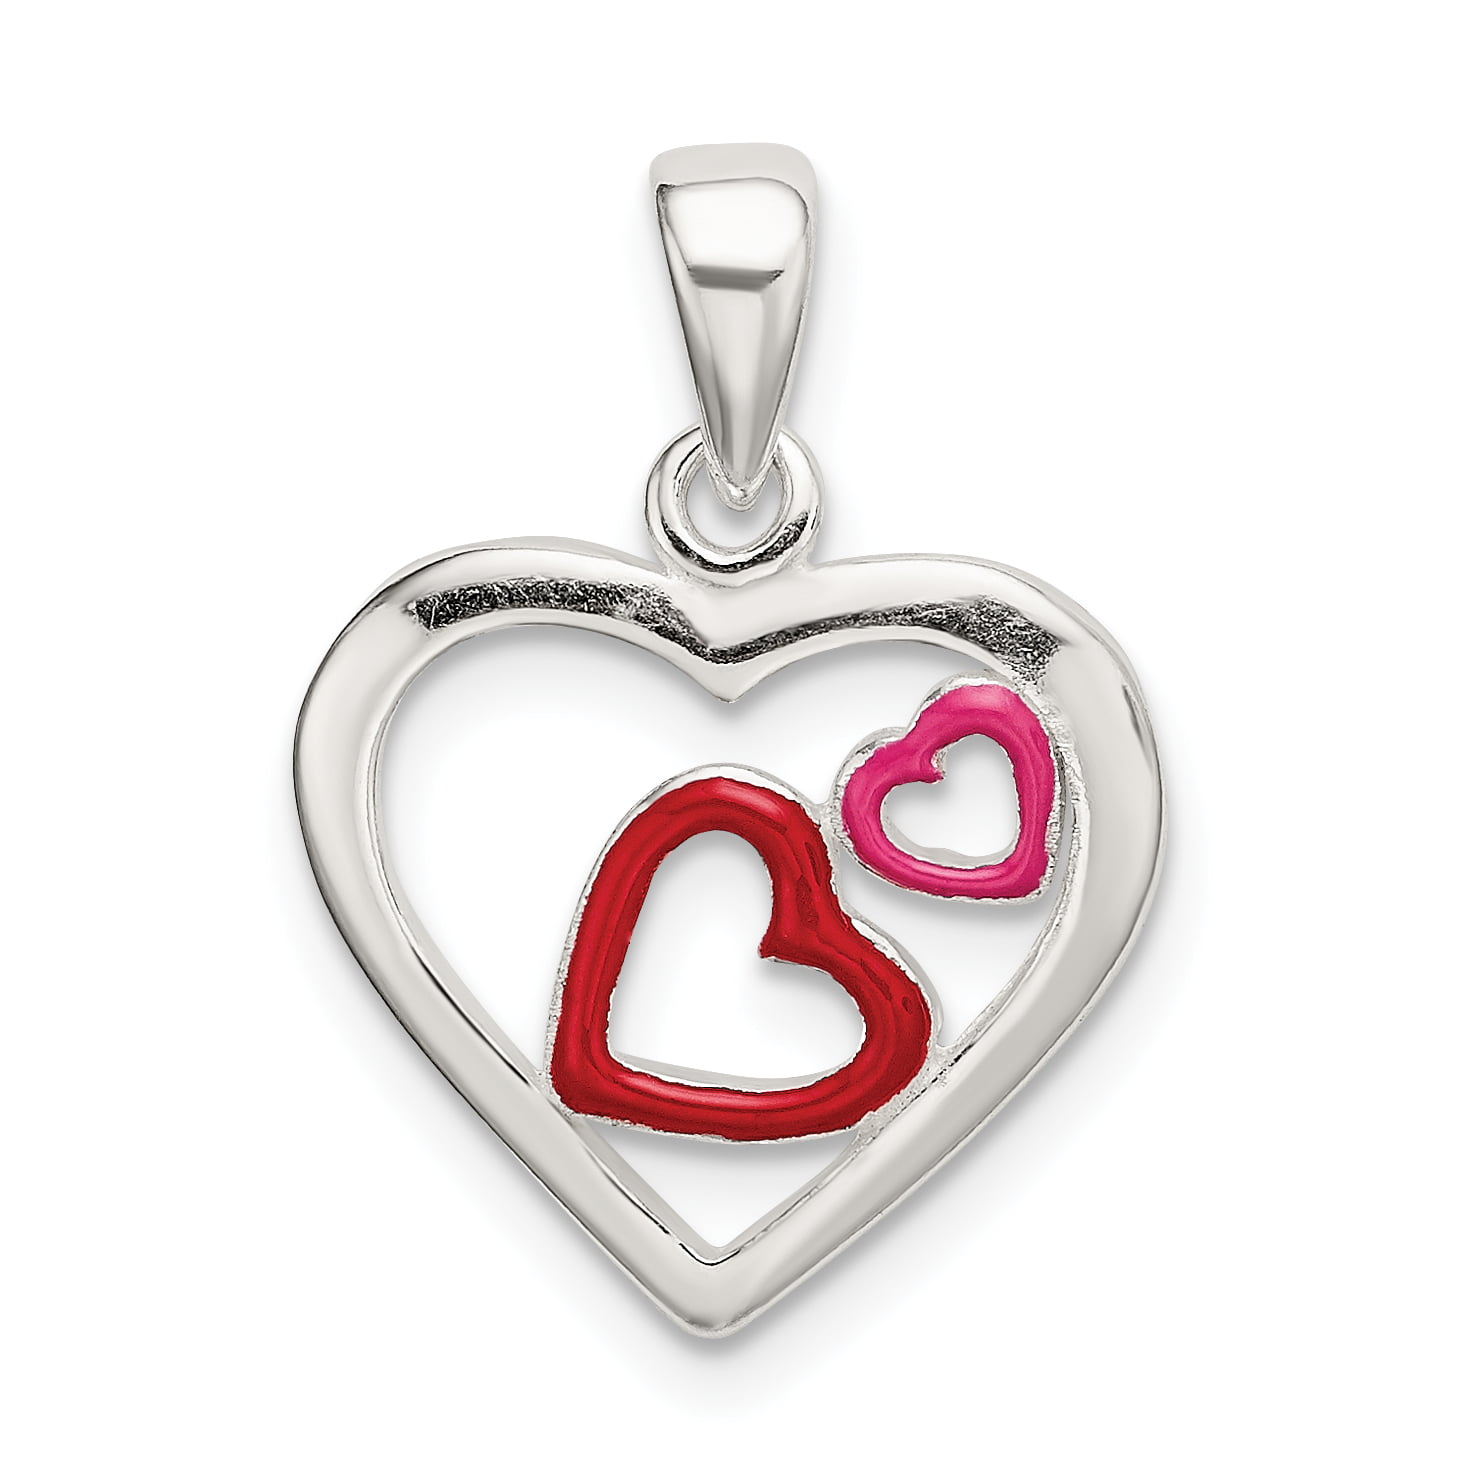 925 Sterling Silver Heart with heart charm necklace pendant gift 